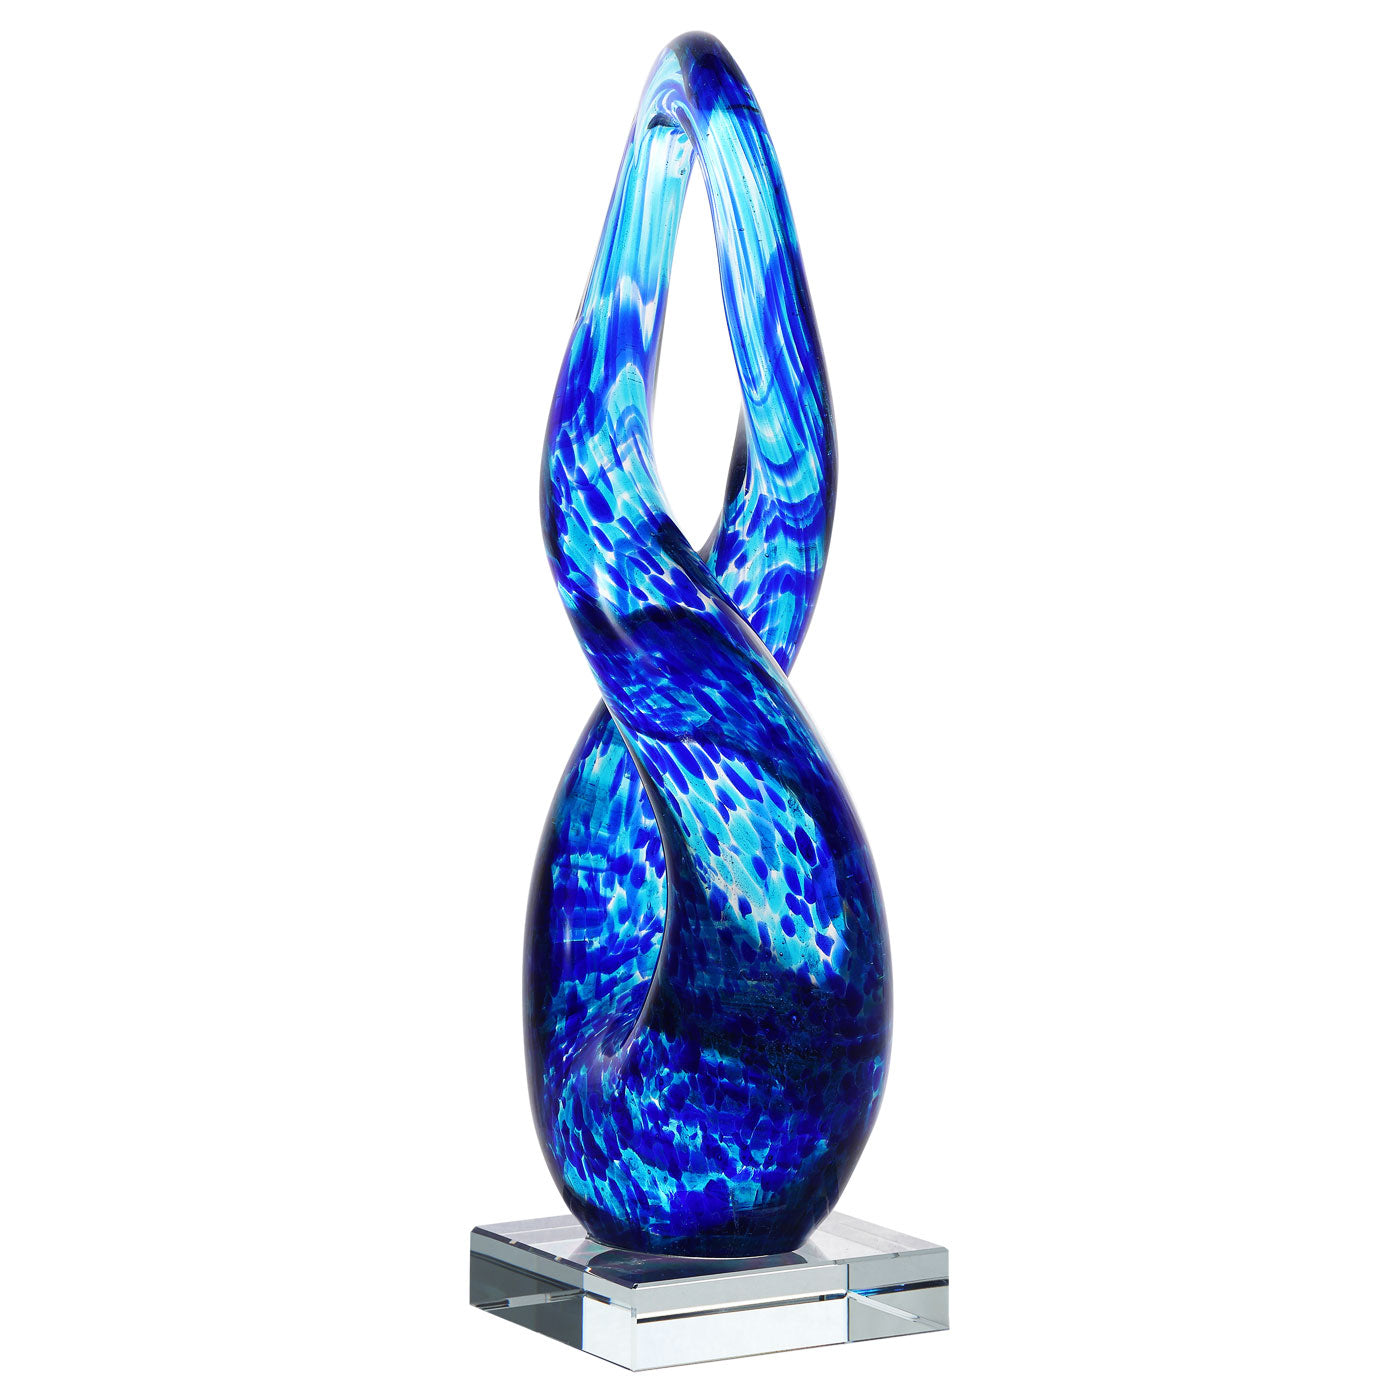 Luxury Lane Hand Blown Abstract Twisted Infinity Loop Sommerso Art Glass Sculpture 15 inch tall